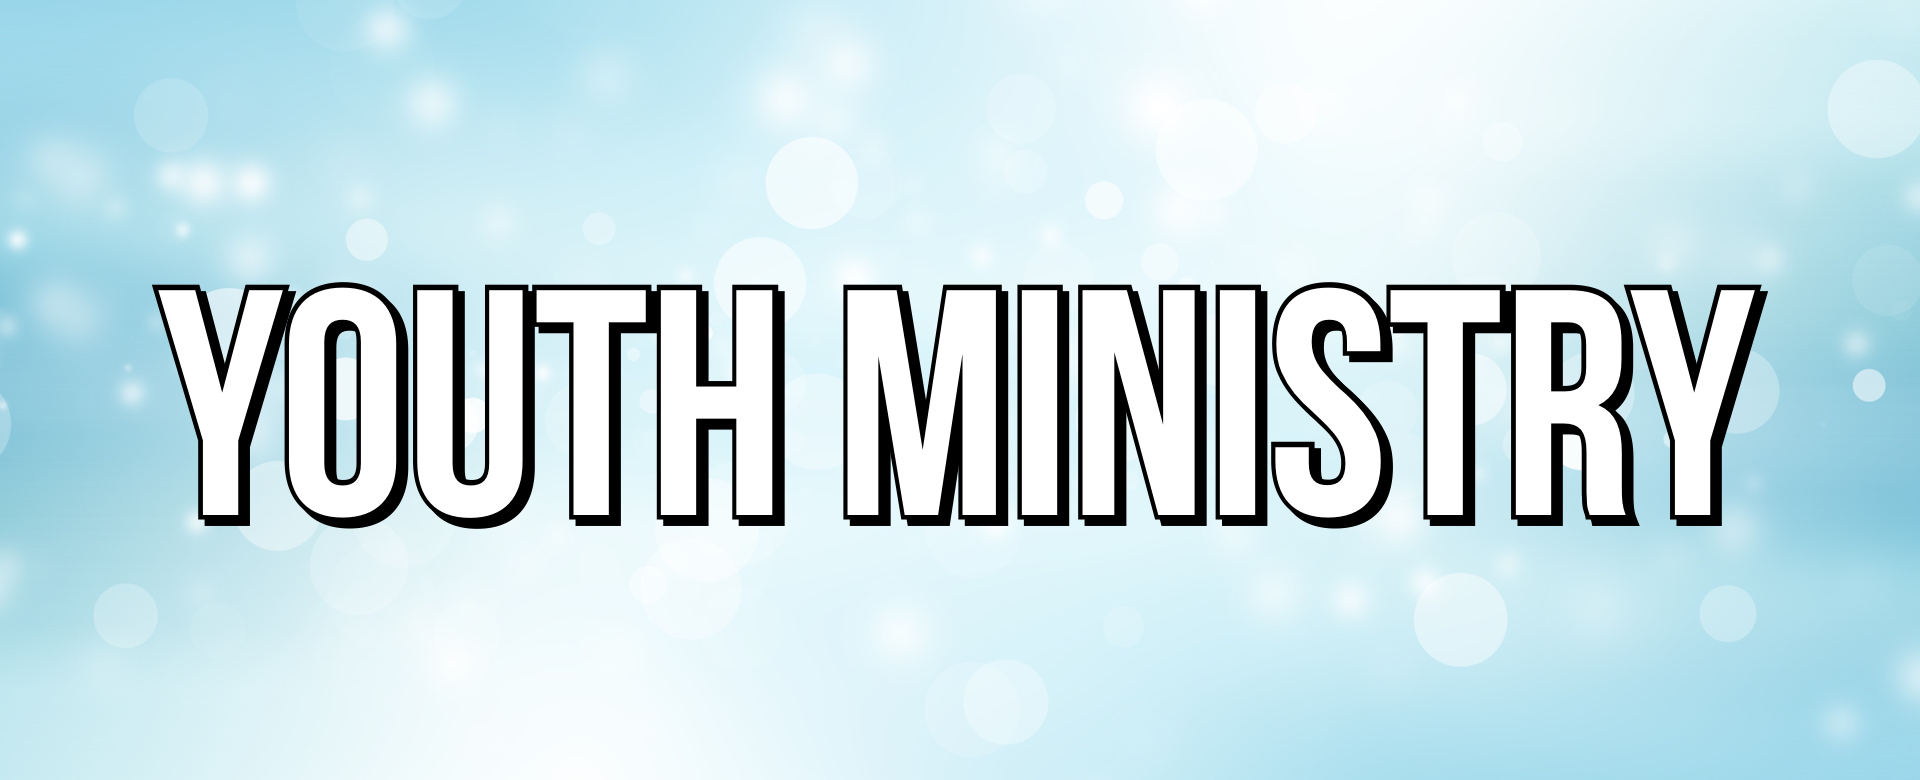 Youth Ministry - North Point Baptist Church